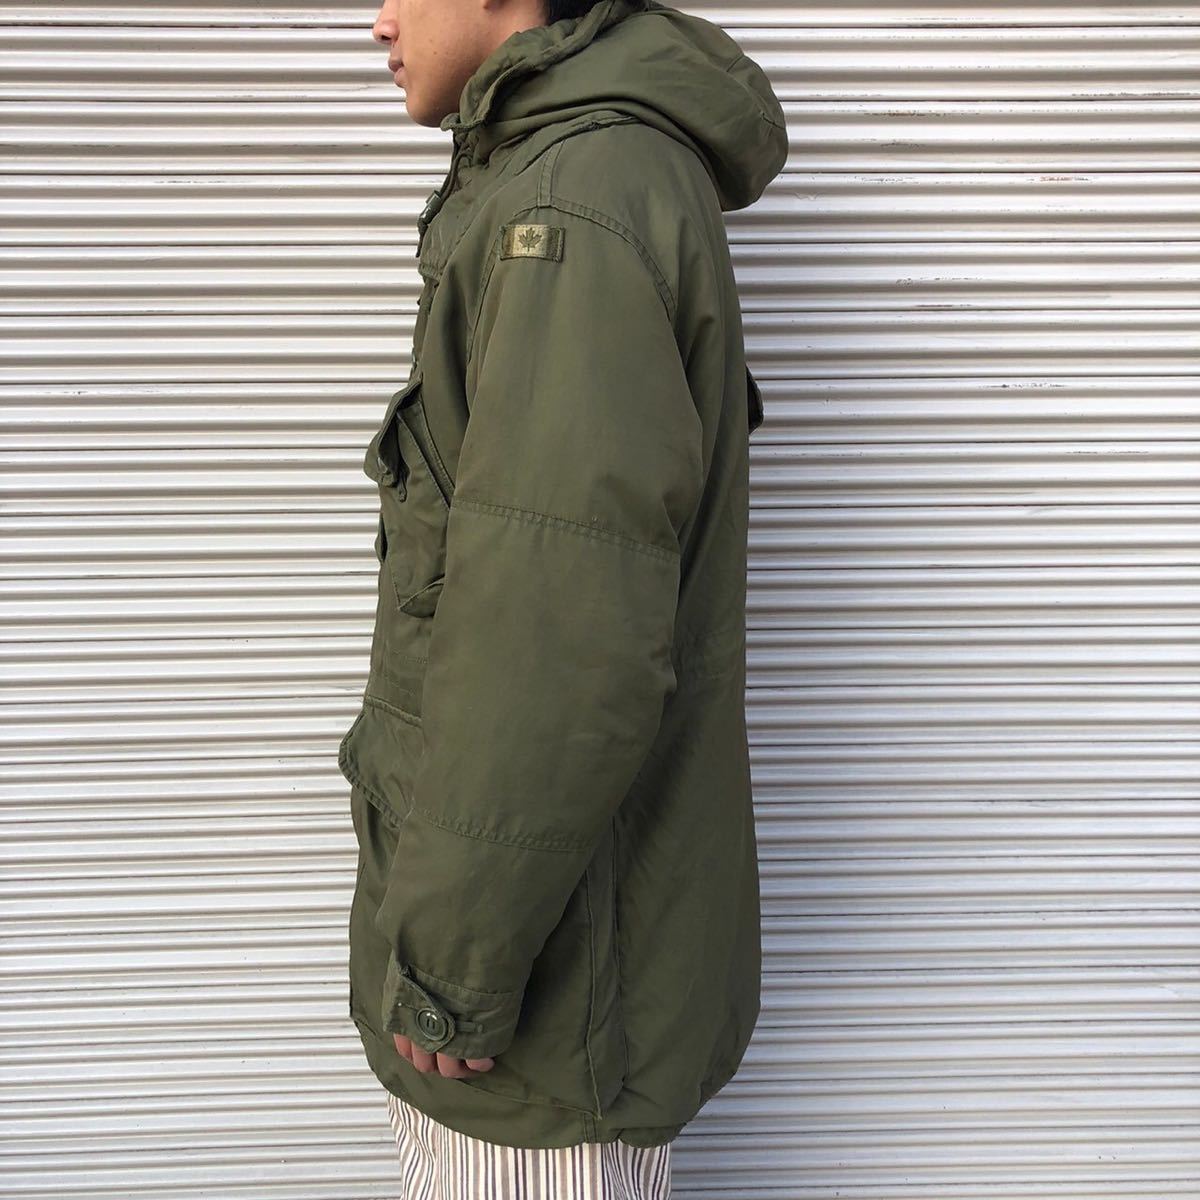  finest quality 1990s CANADA Parka Extreme Cold Weather Combat OG107 Parker Canada army the truth thing military ECW 80s Mod's Coat Vintage M